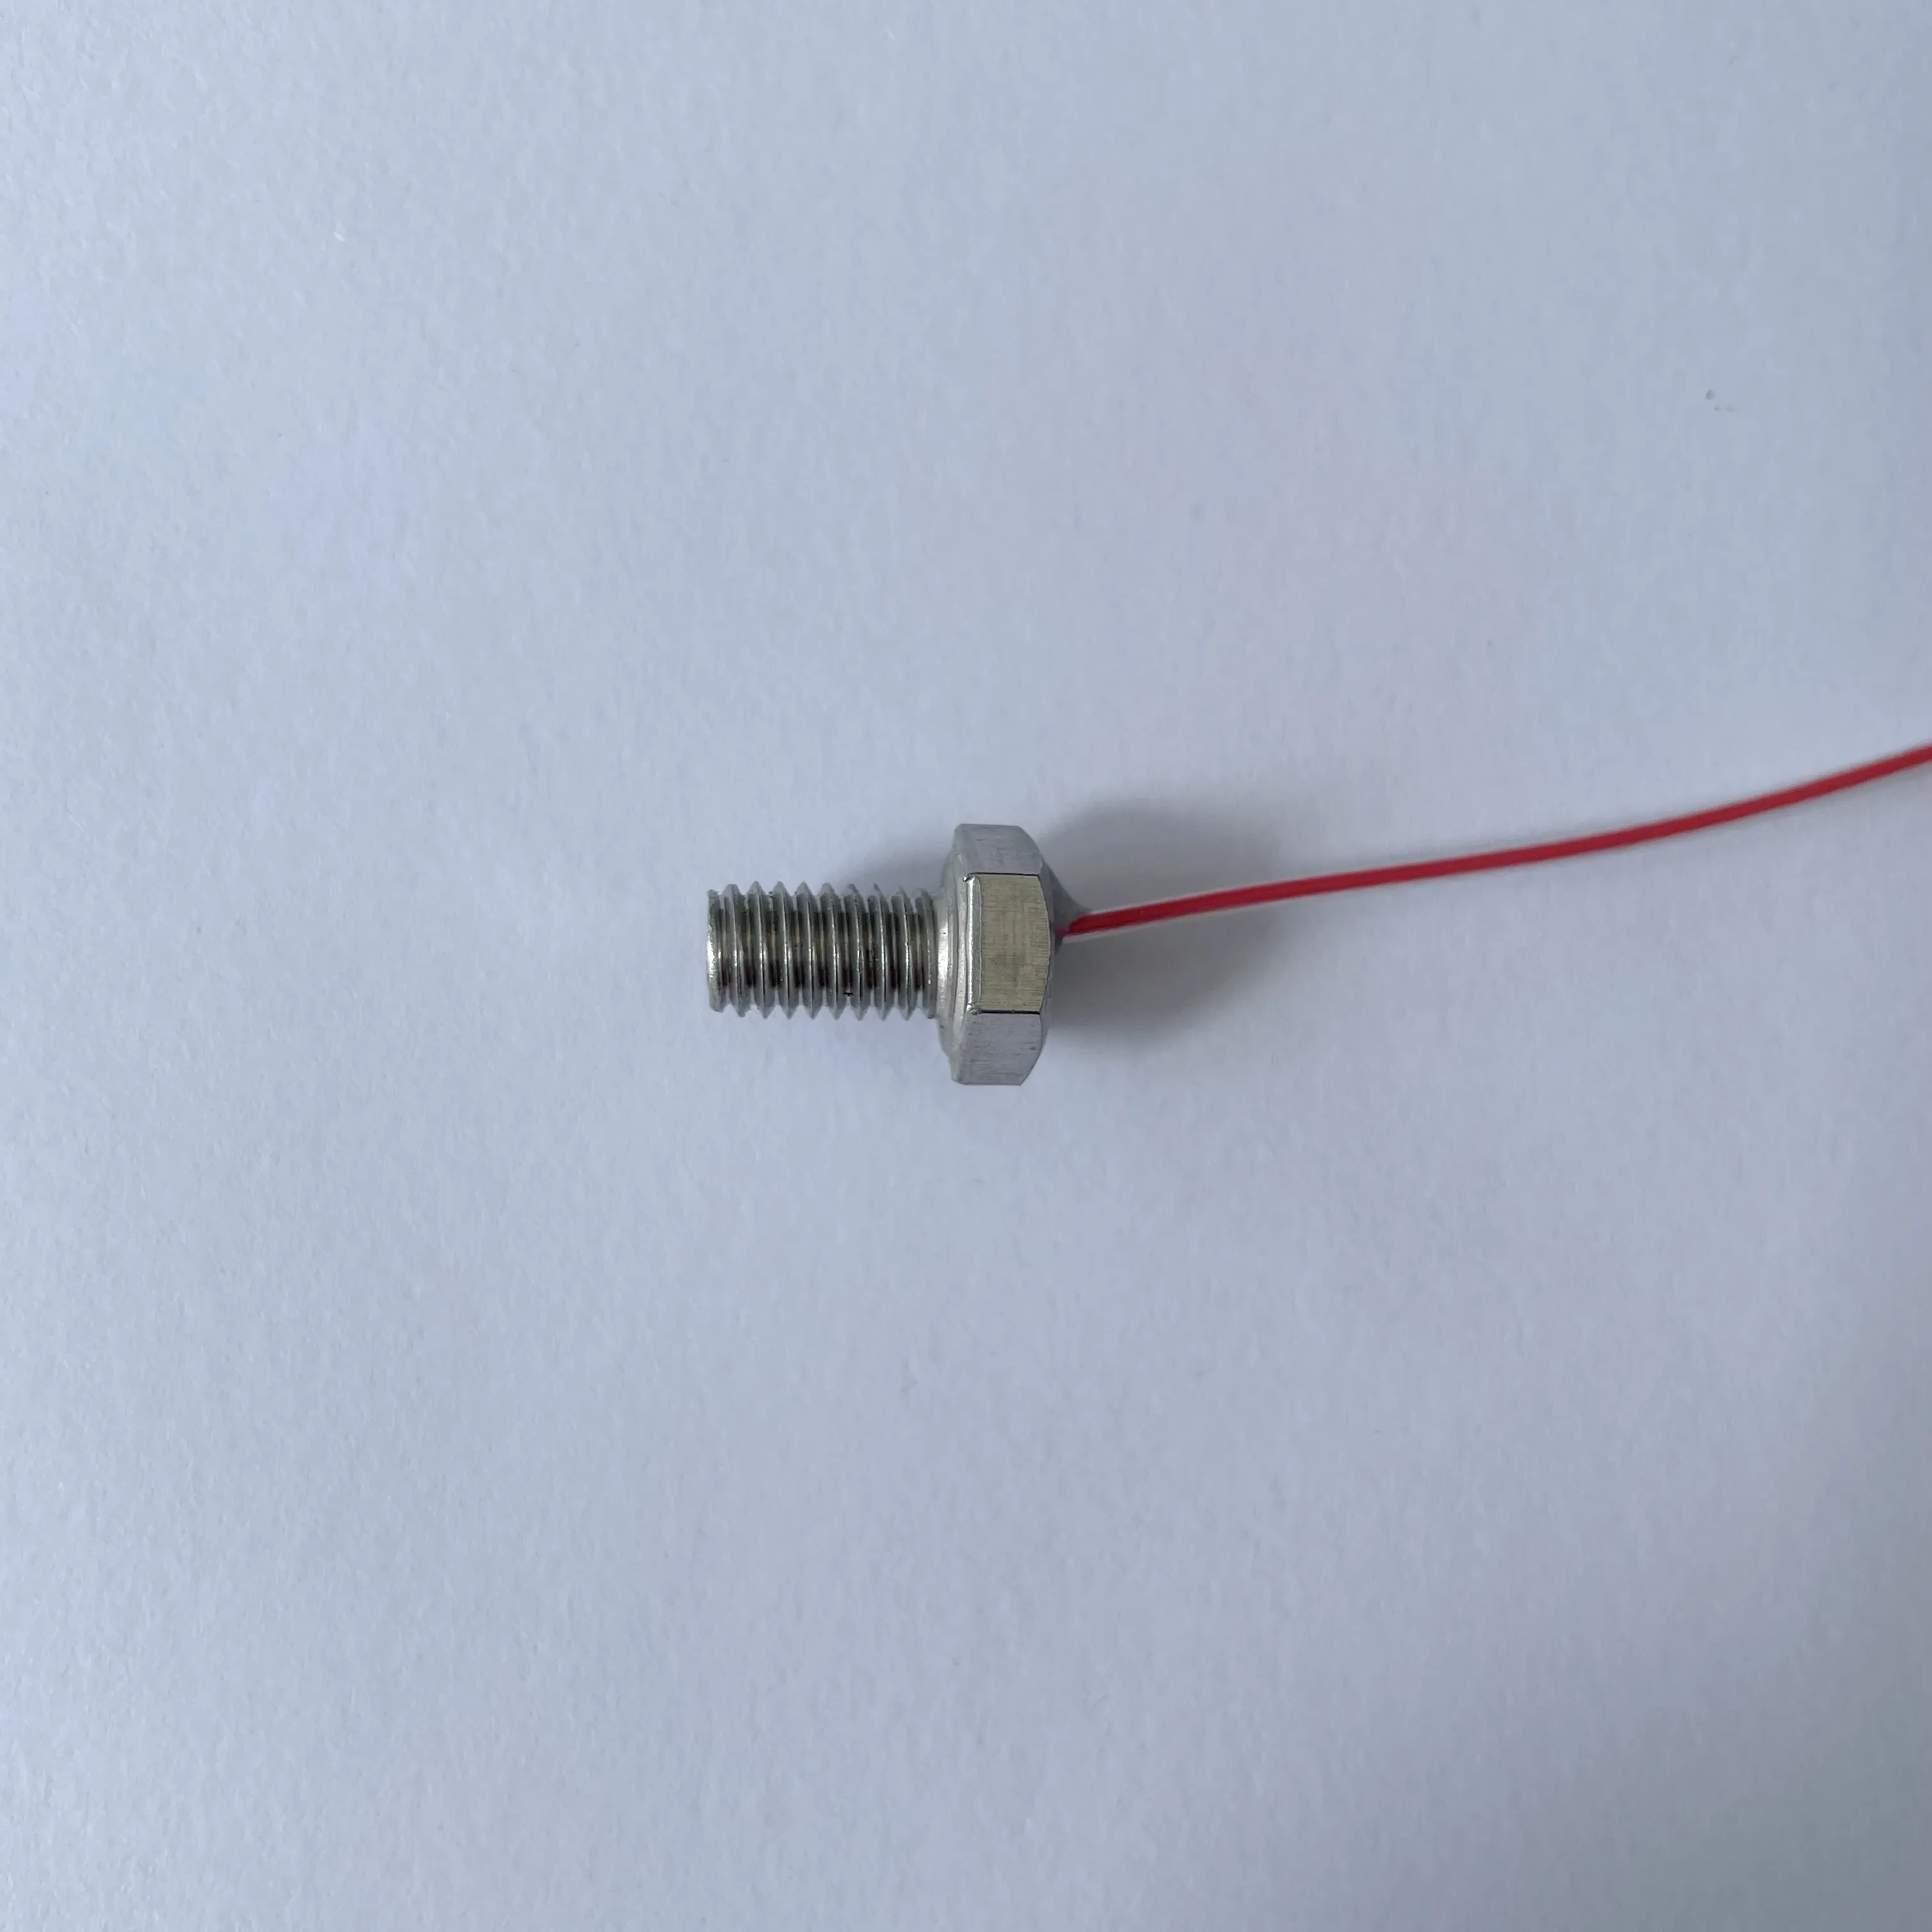 PT100/pt1000 ROHS/REACH Industry M6 Screw RTD Temperature Sensor With PTFE Cable